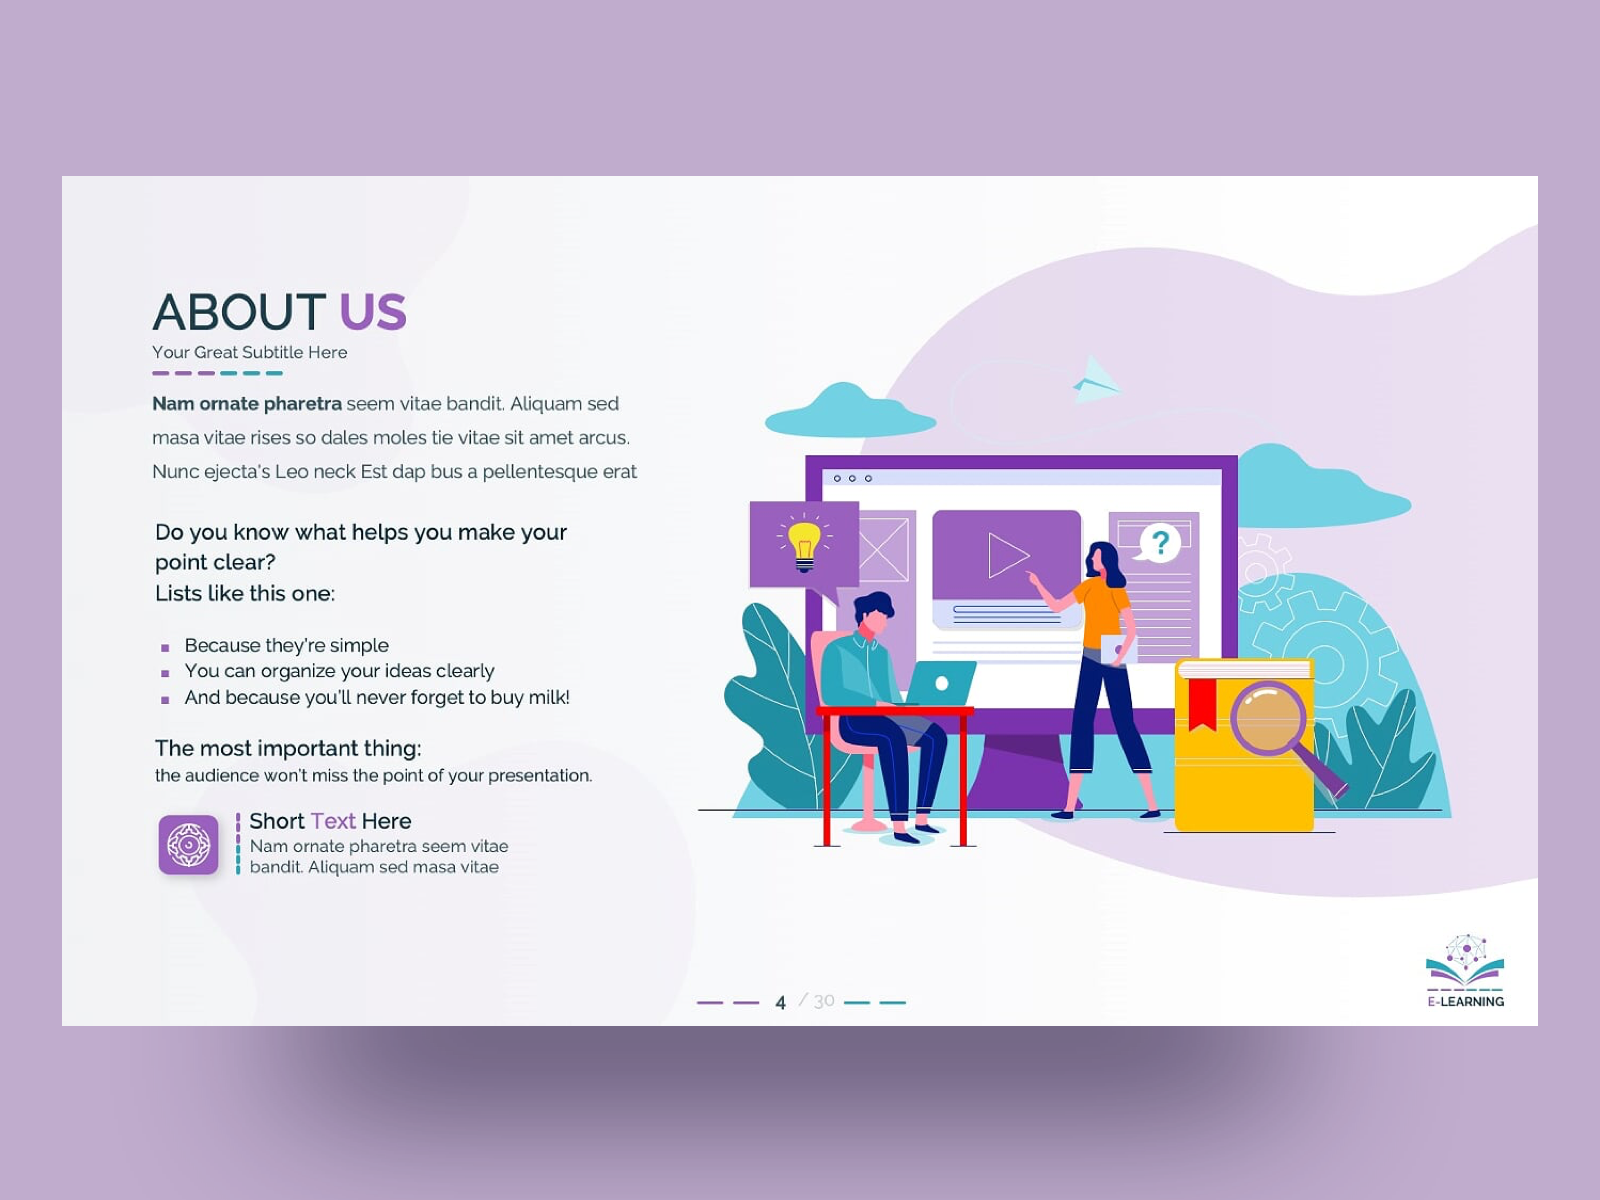 E-Learning PowerPoint Presentation Template by Premast on Dribbble